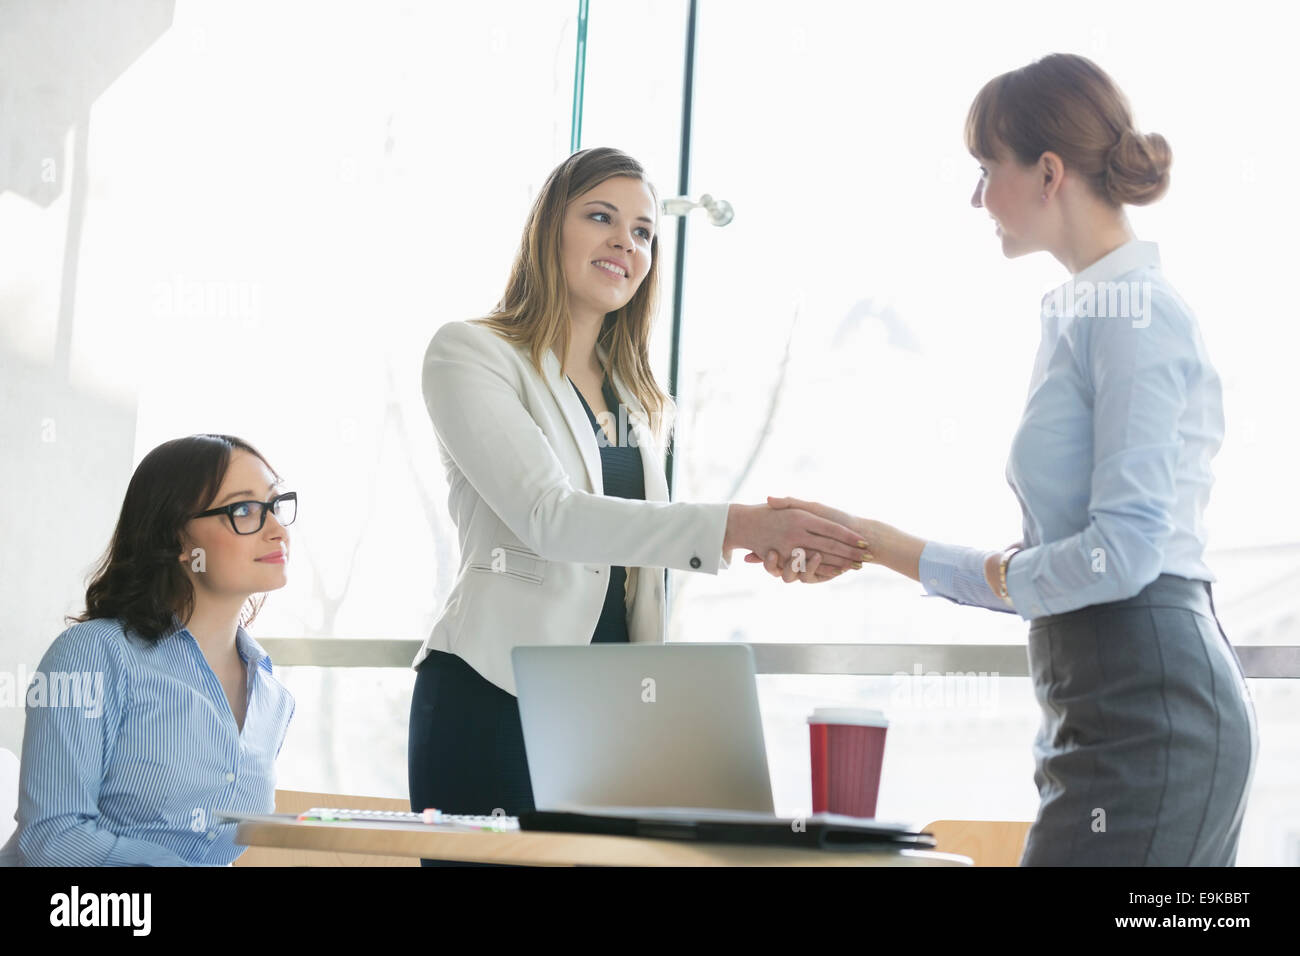 High angle view of businesswomen shaking hands at table in office Banque D'Images